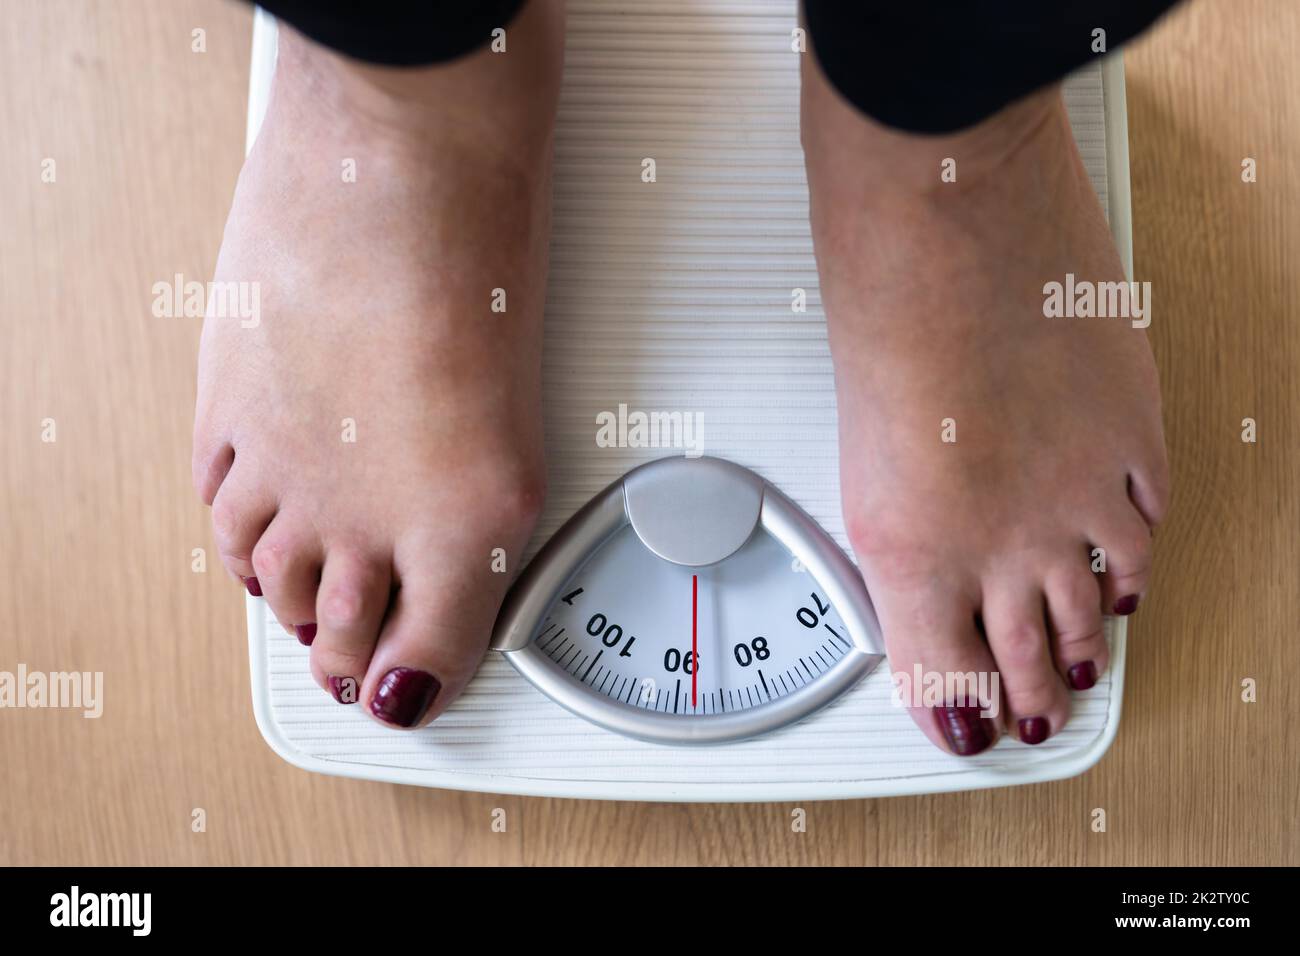 https://c8.alamy.com/comp/2K2TY0C/person-standing-on-weighing-scale-2K2TY0C.jpg